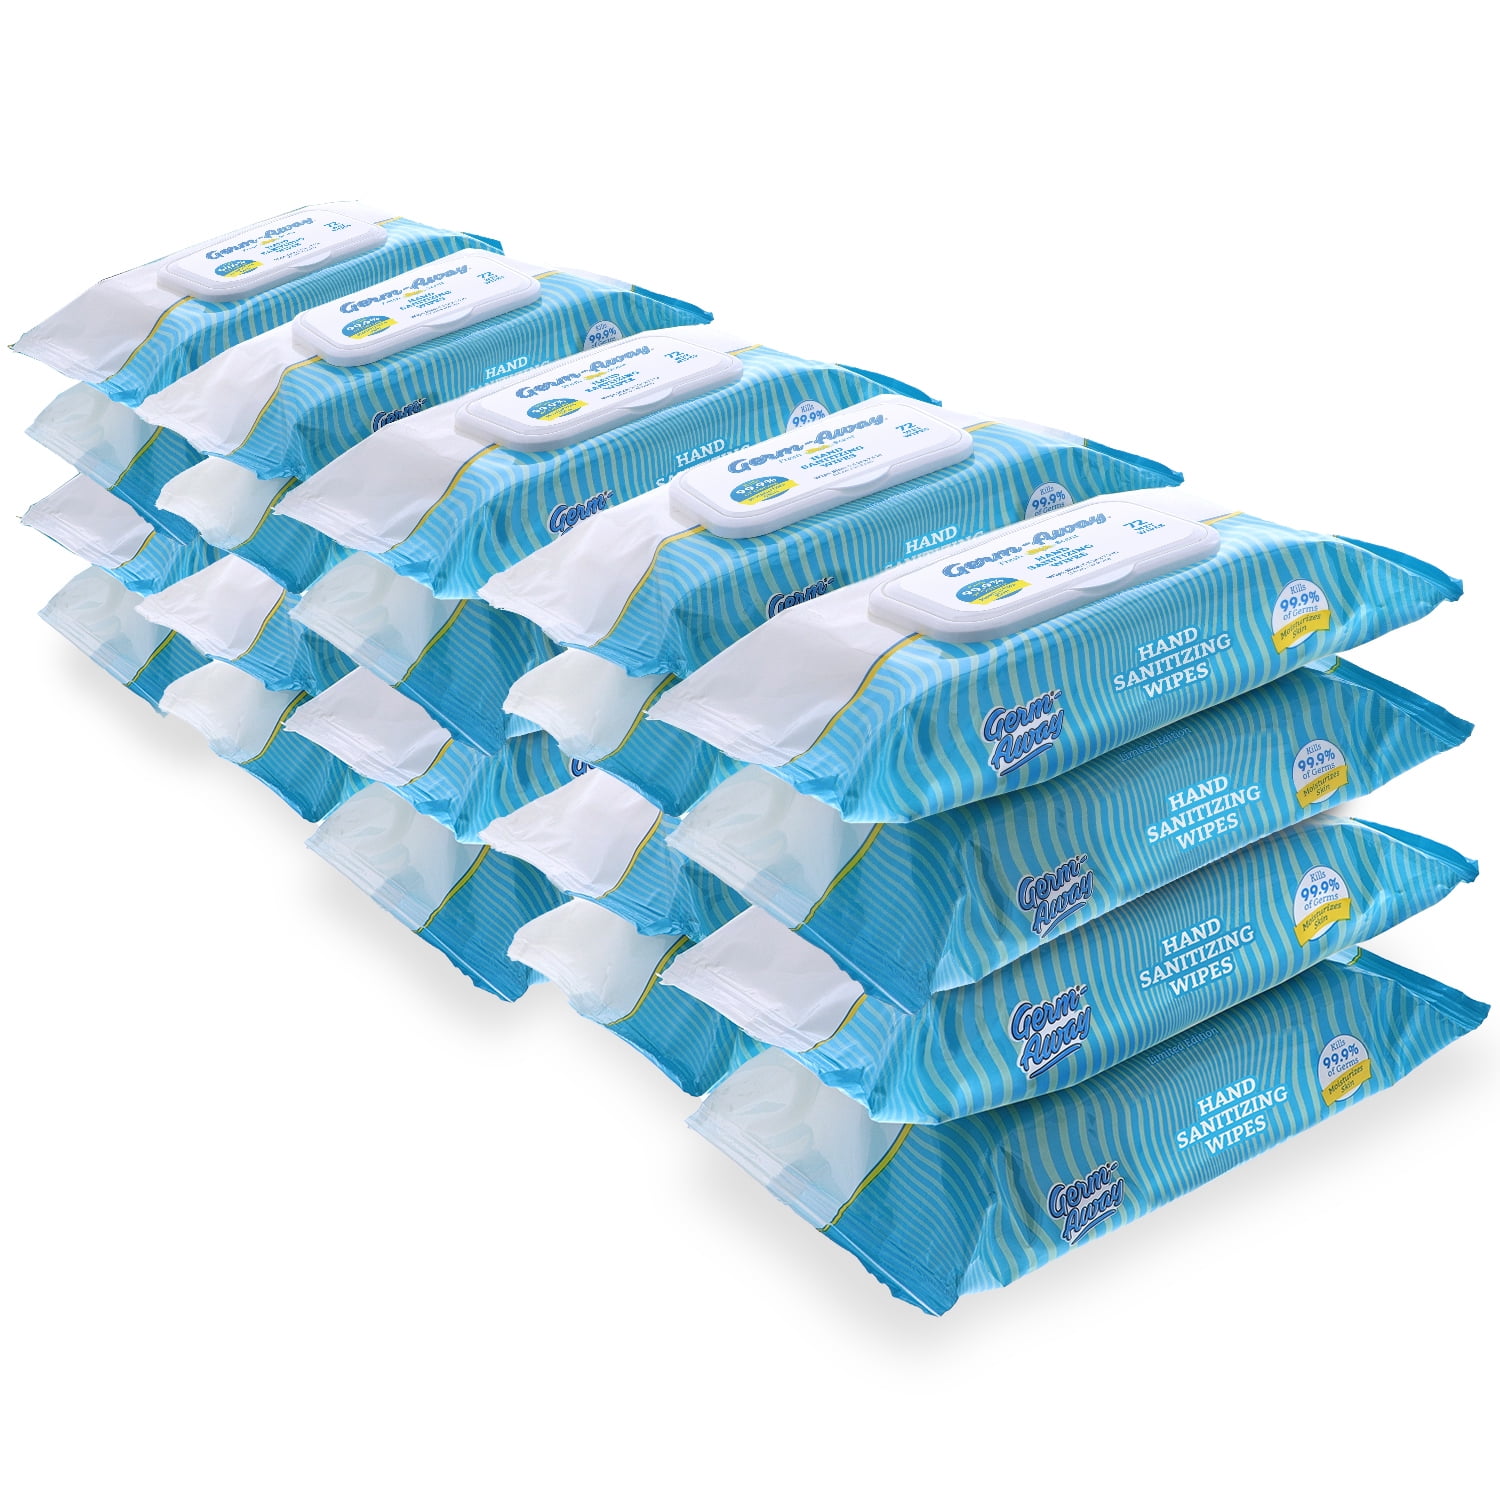 Germ-Away Fresh Scent Antibacterial Plant-Based Hand Wipes Soft Pack 72ct, 20pk Case